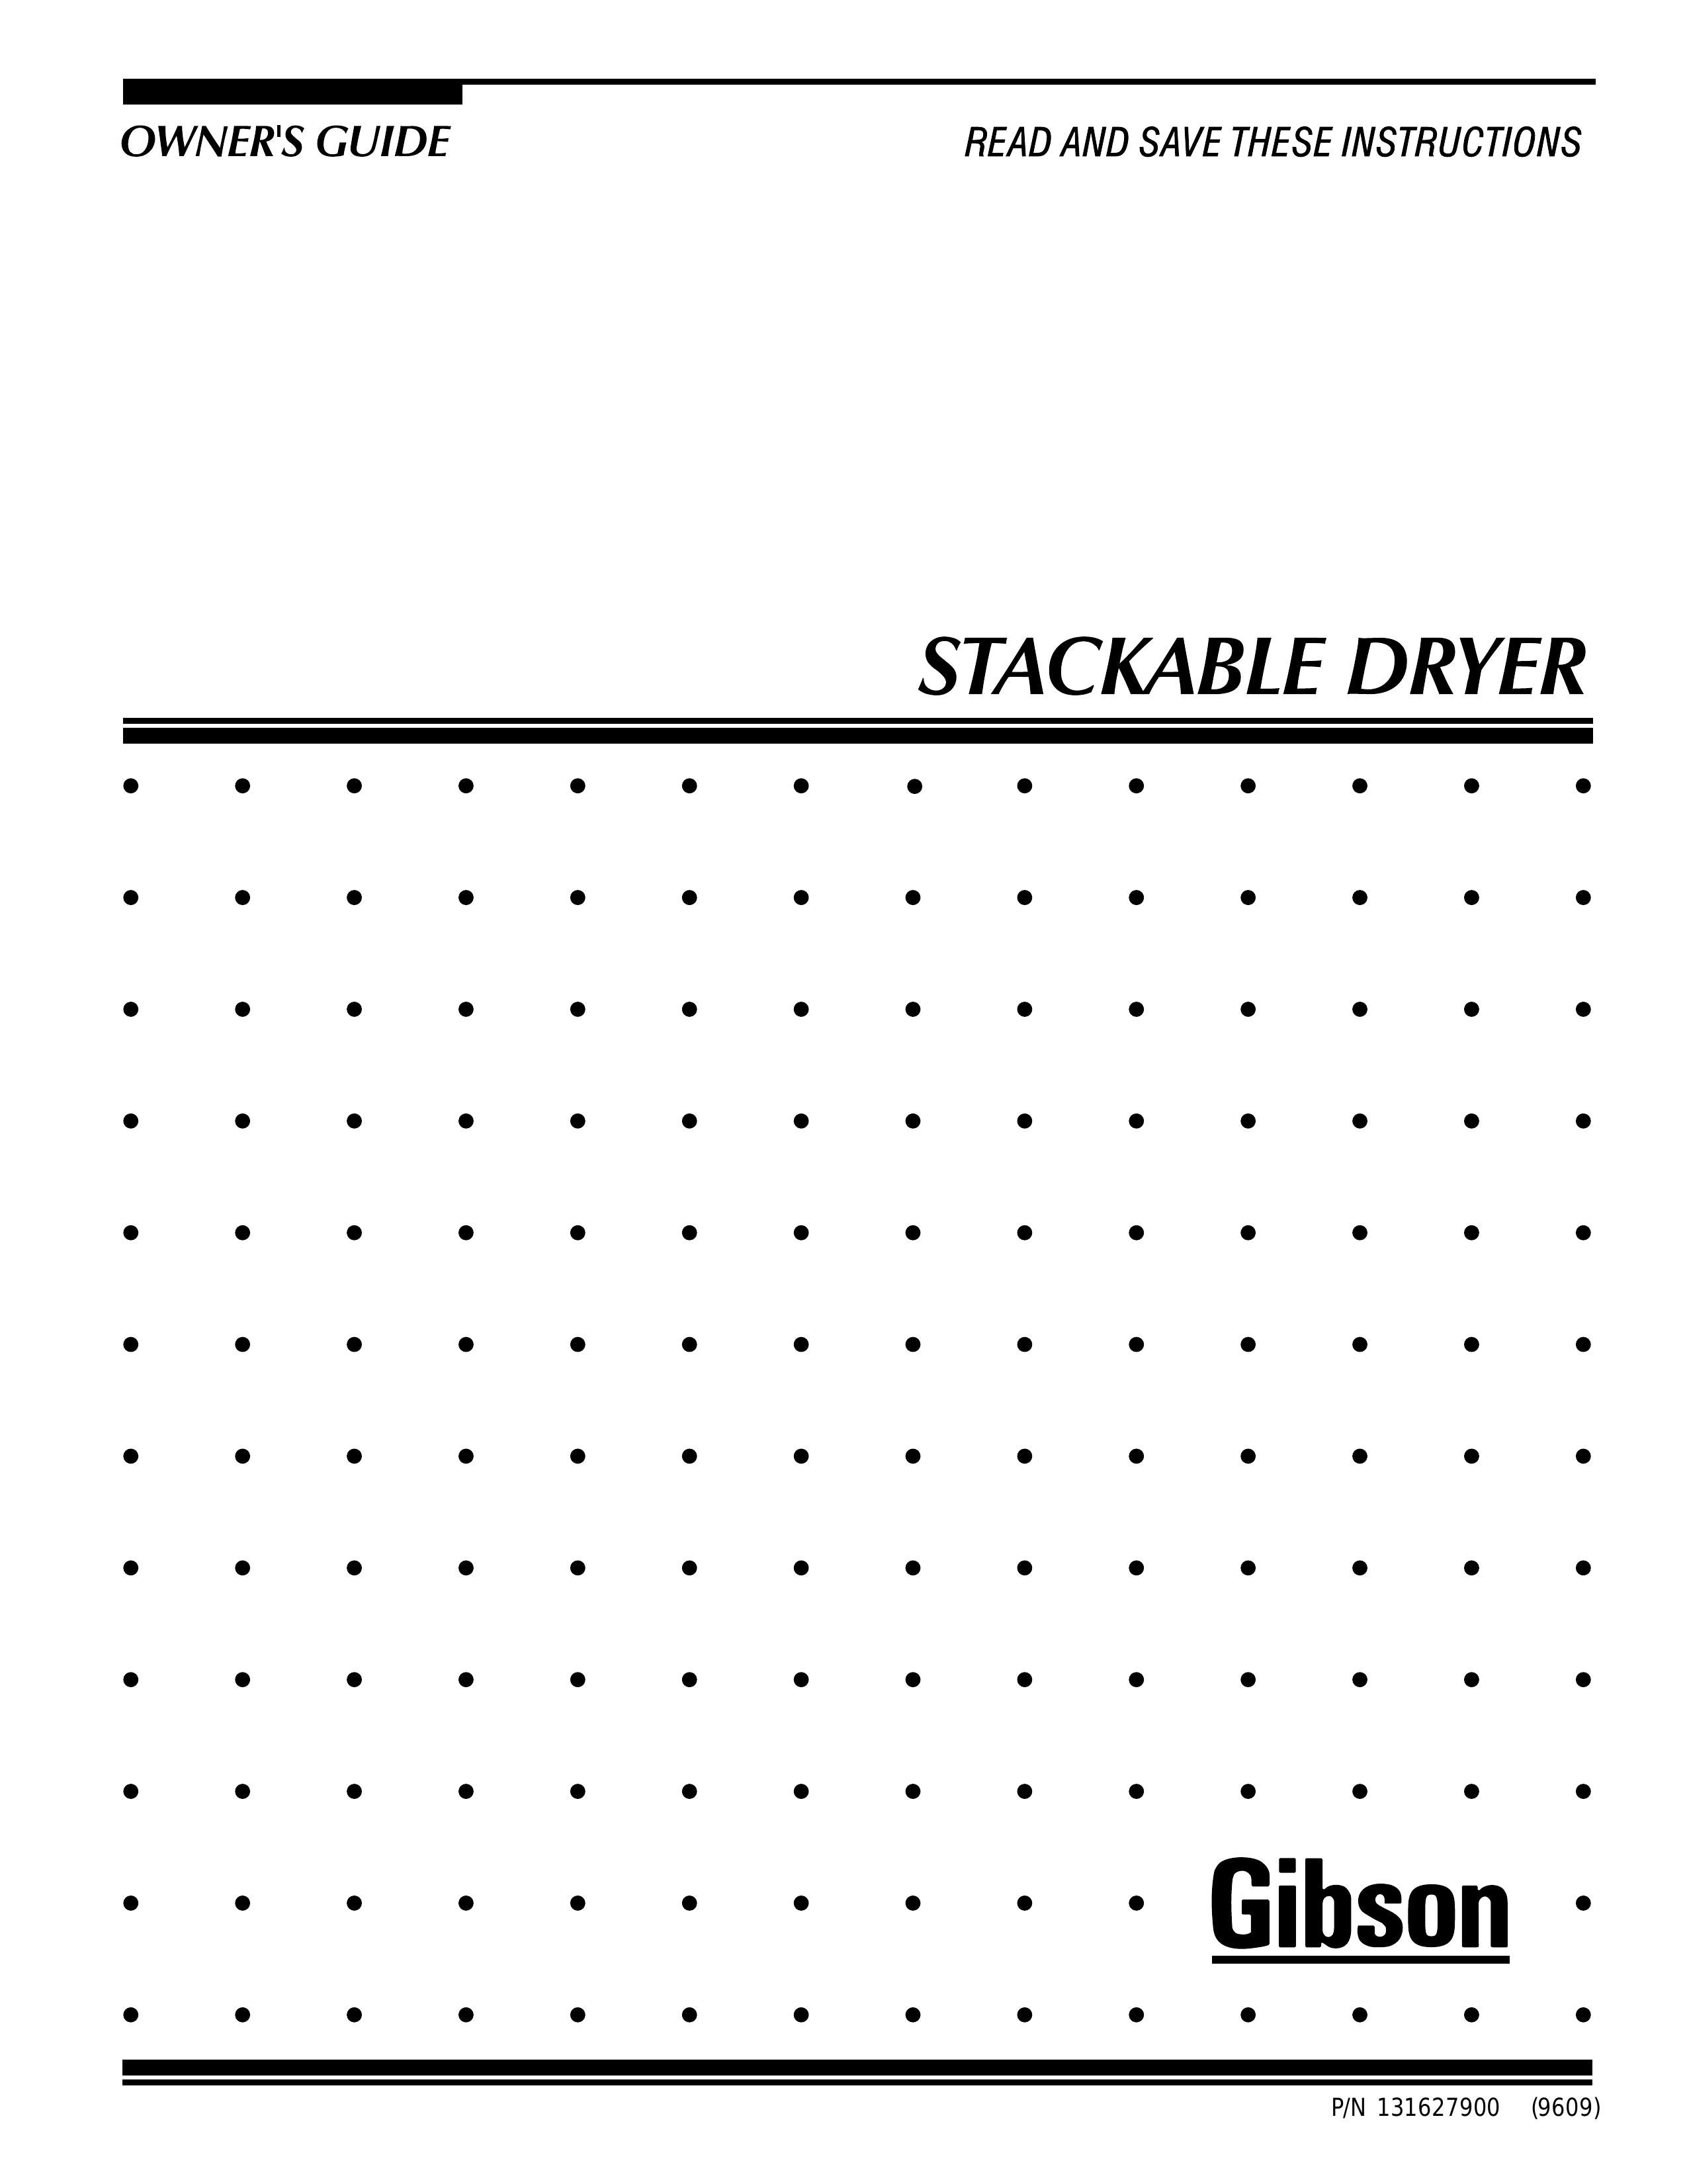 Electrolux - Gibson Stackable Dryer Washer/Dryer User Manual